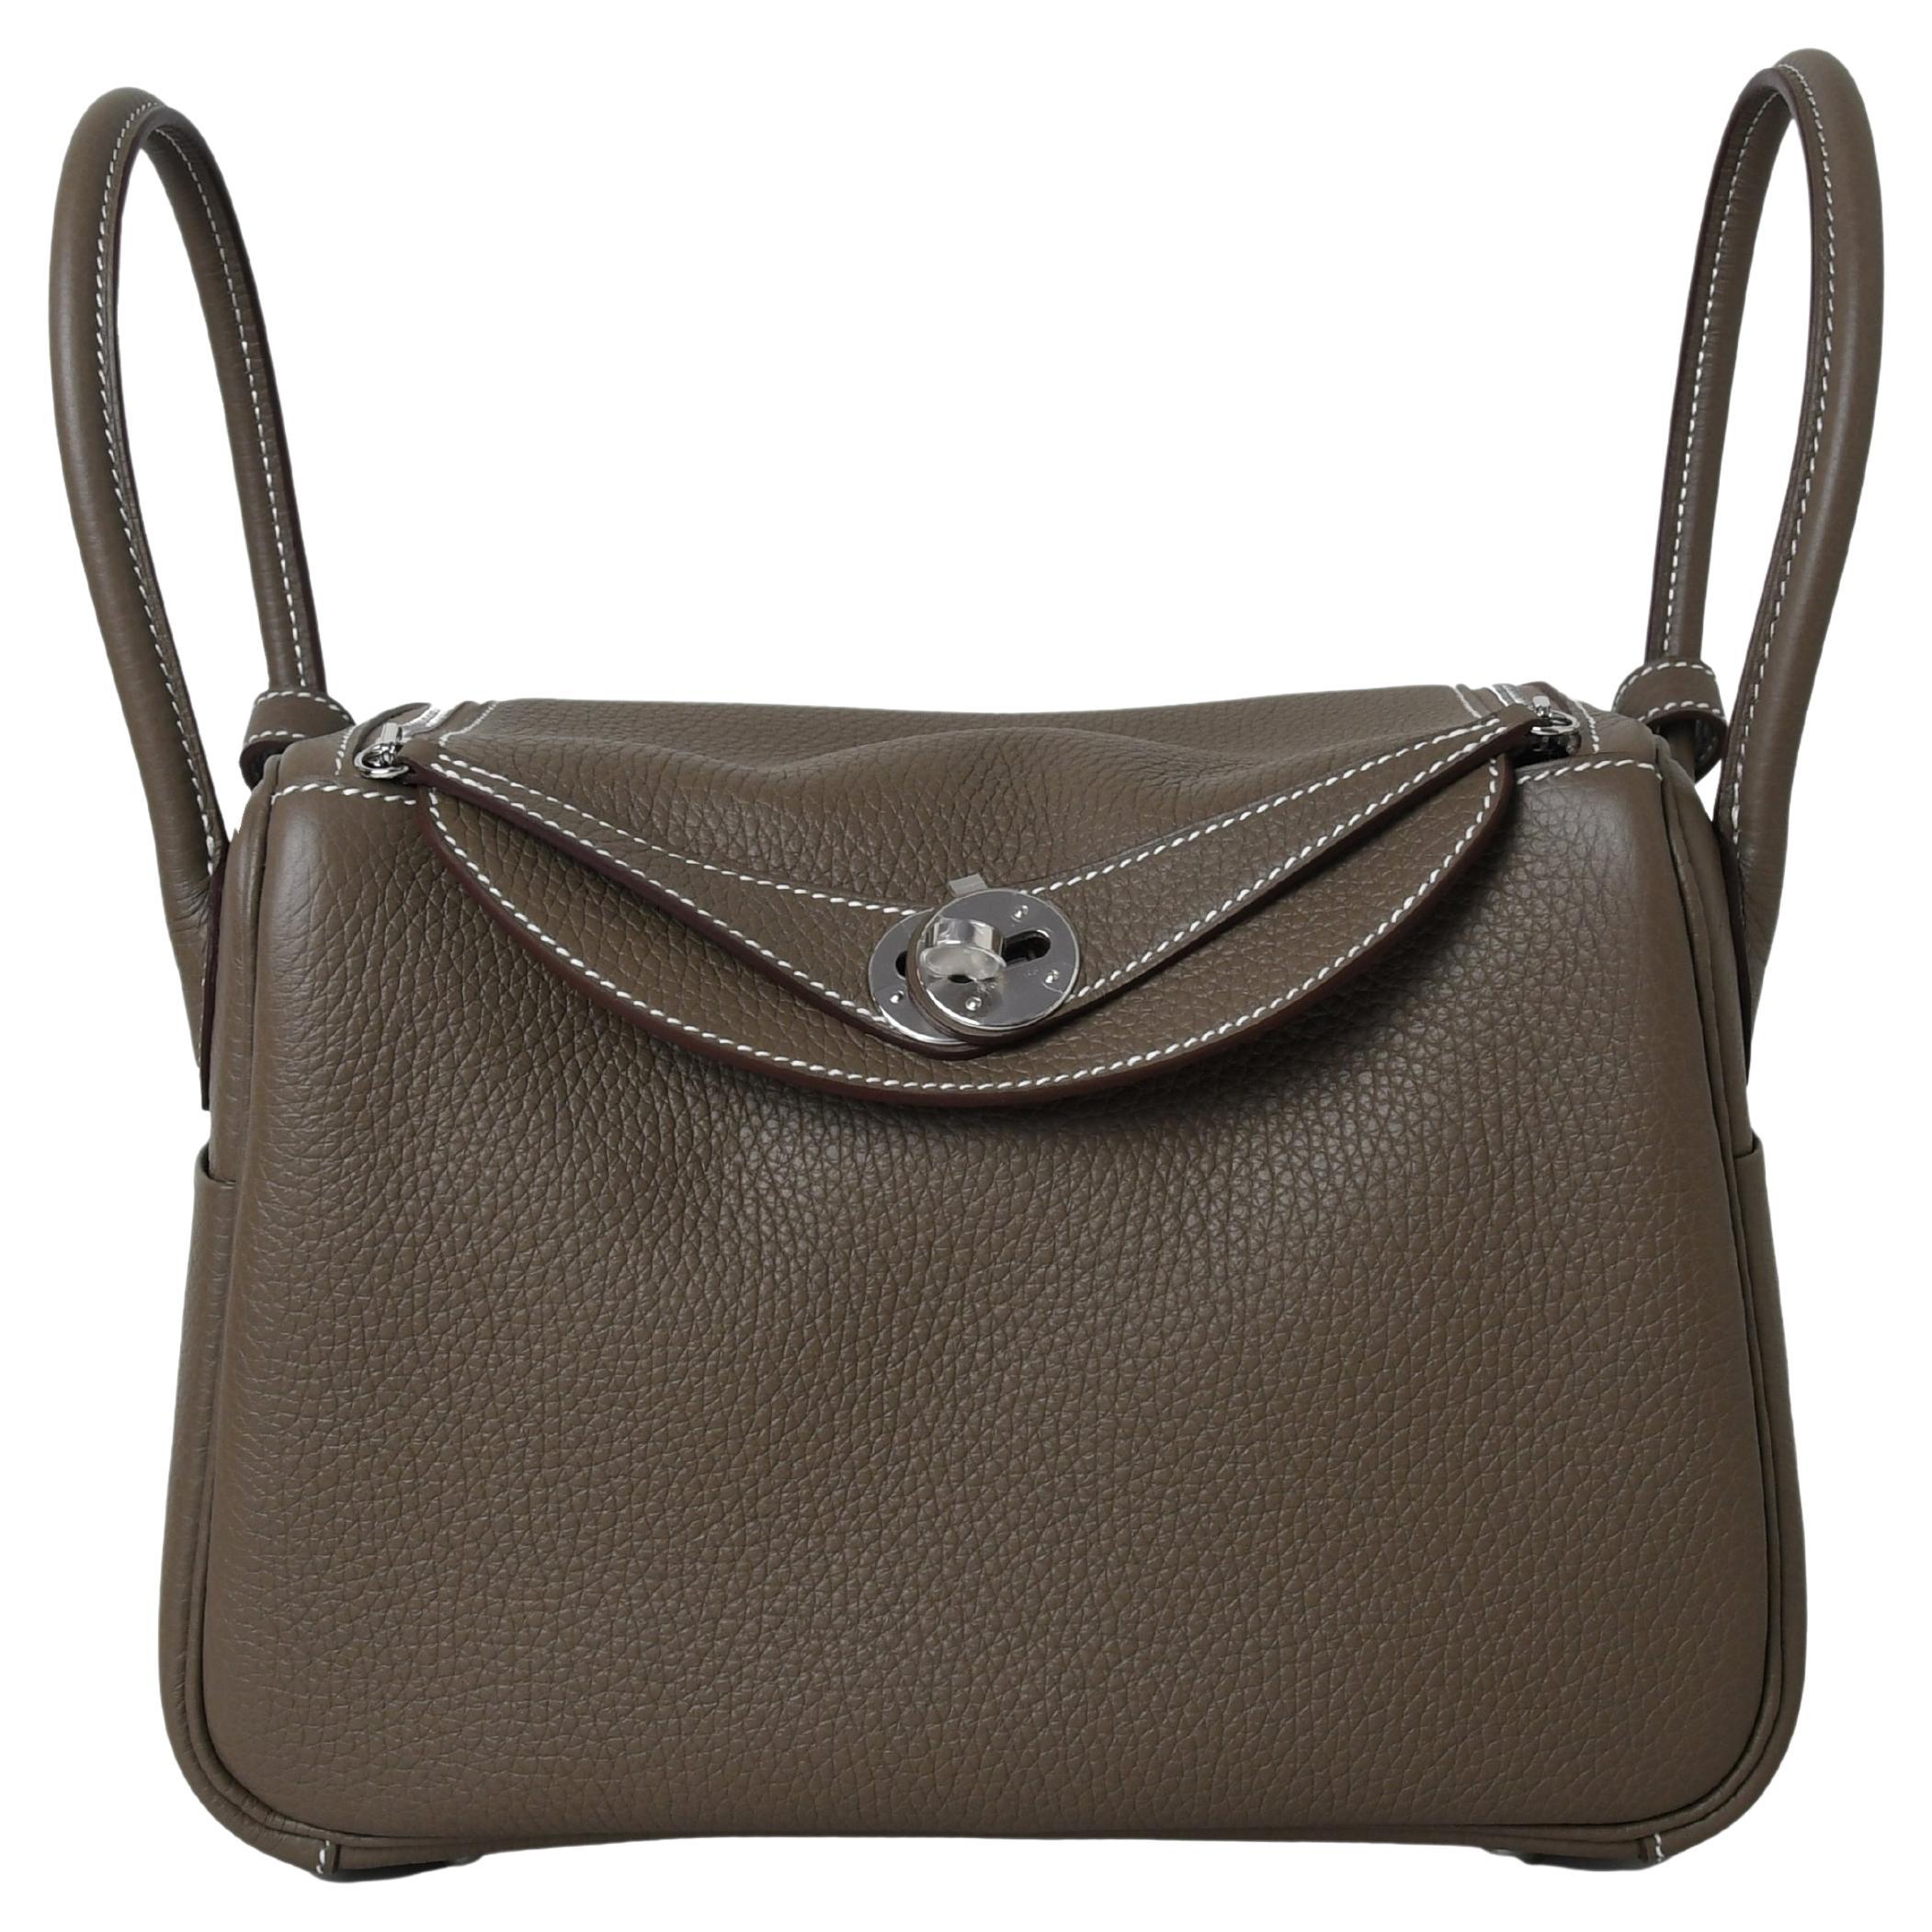 Lindy 26 clemence etoupe bag with gold hardware